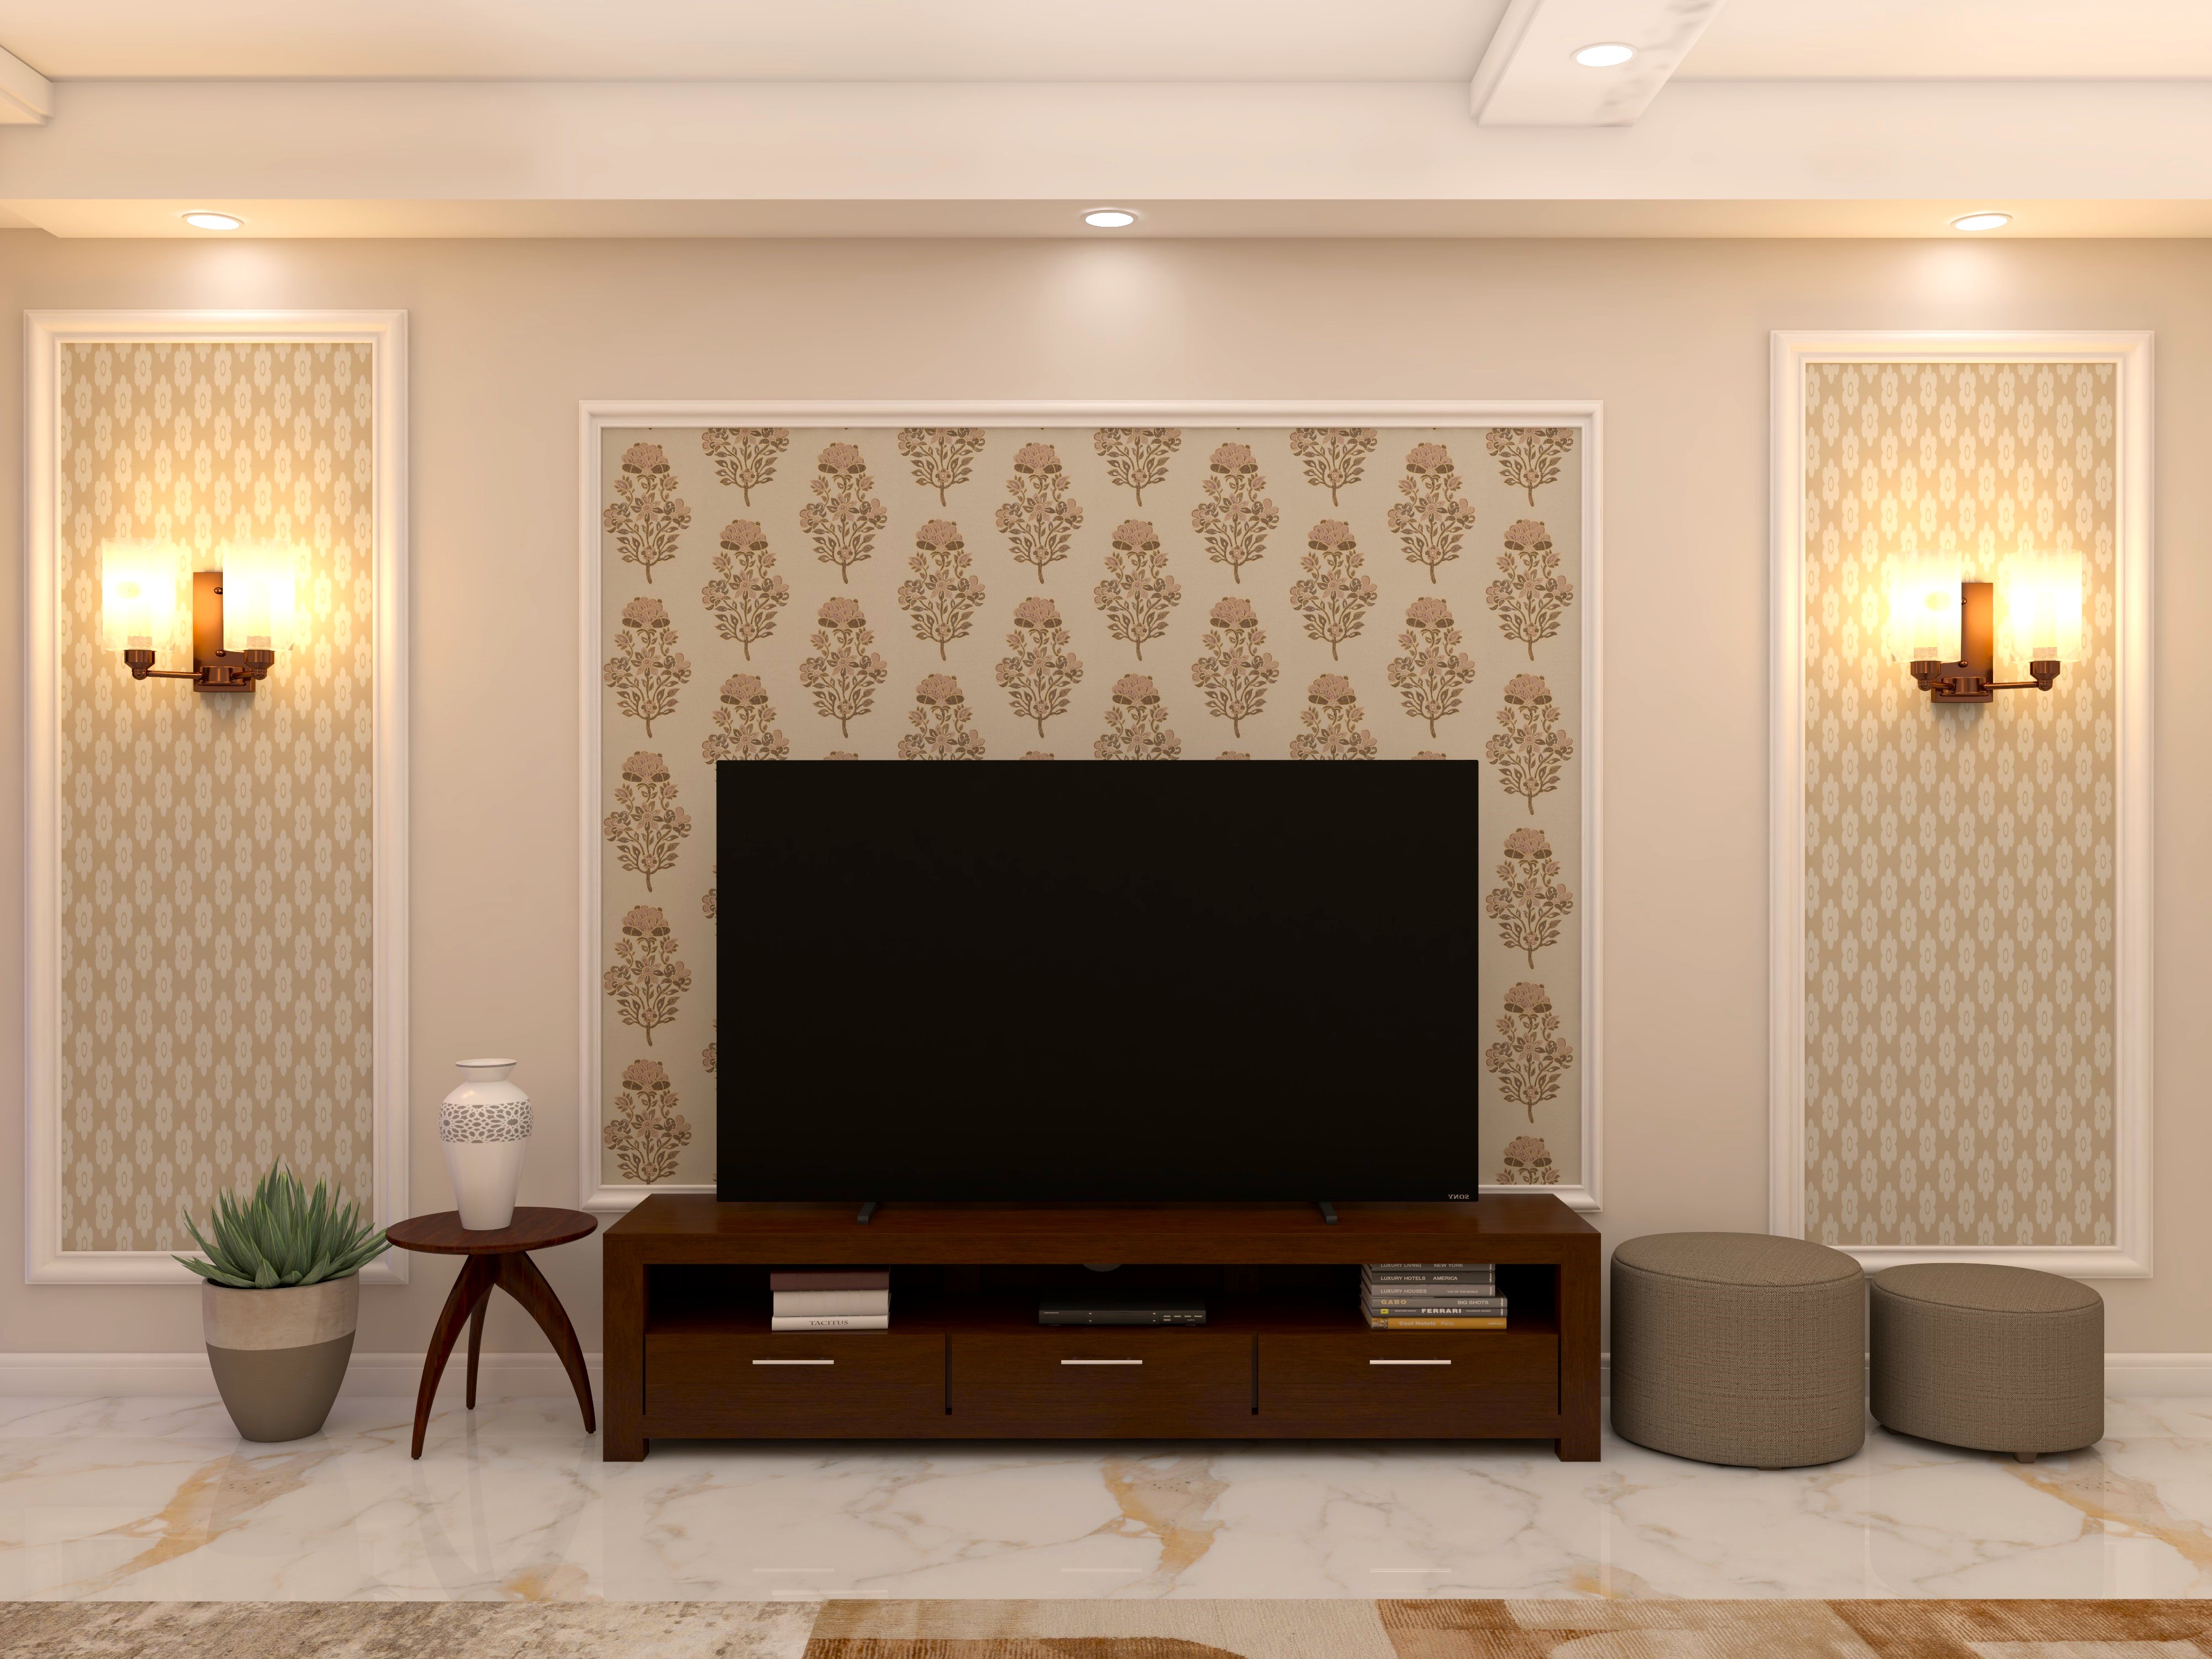 TV unit wall design with mouldings and traditional wallpaper-Beautiful Homes